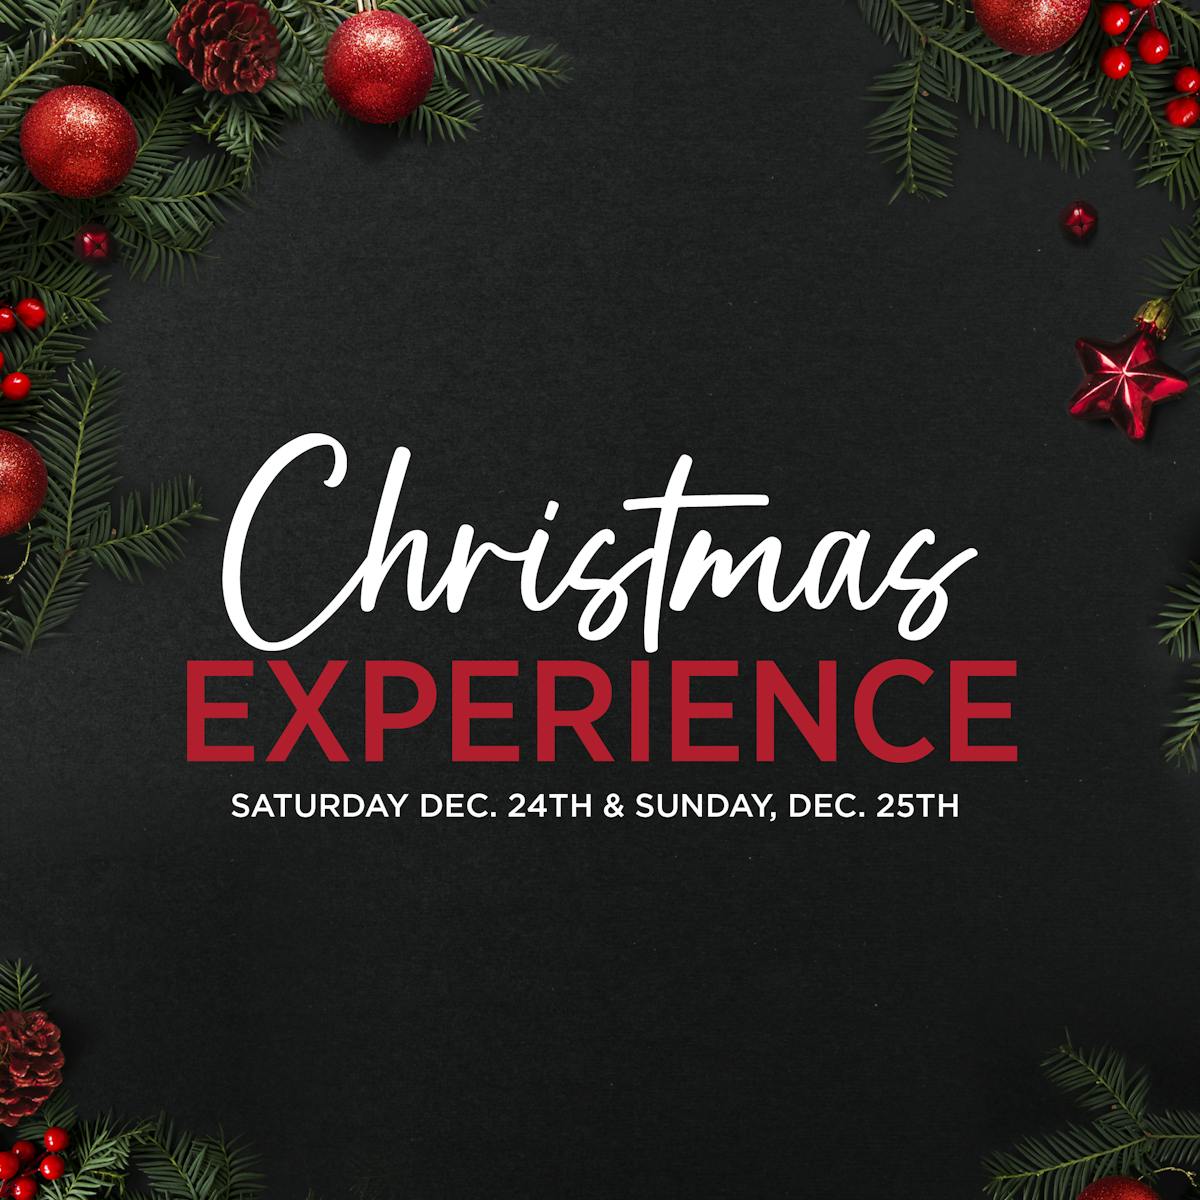 christmas experience image with ornaments